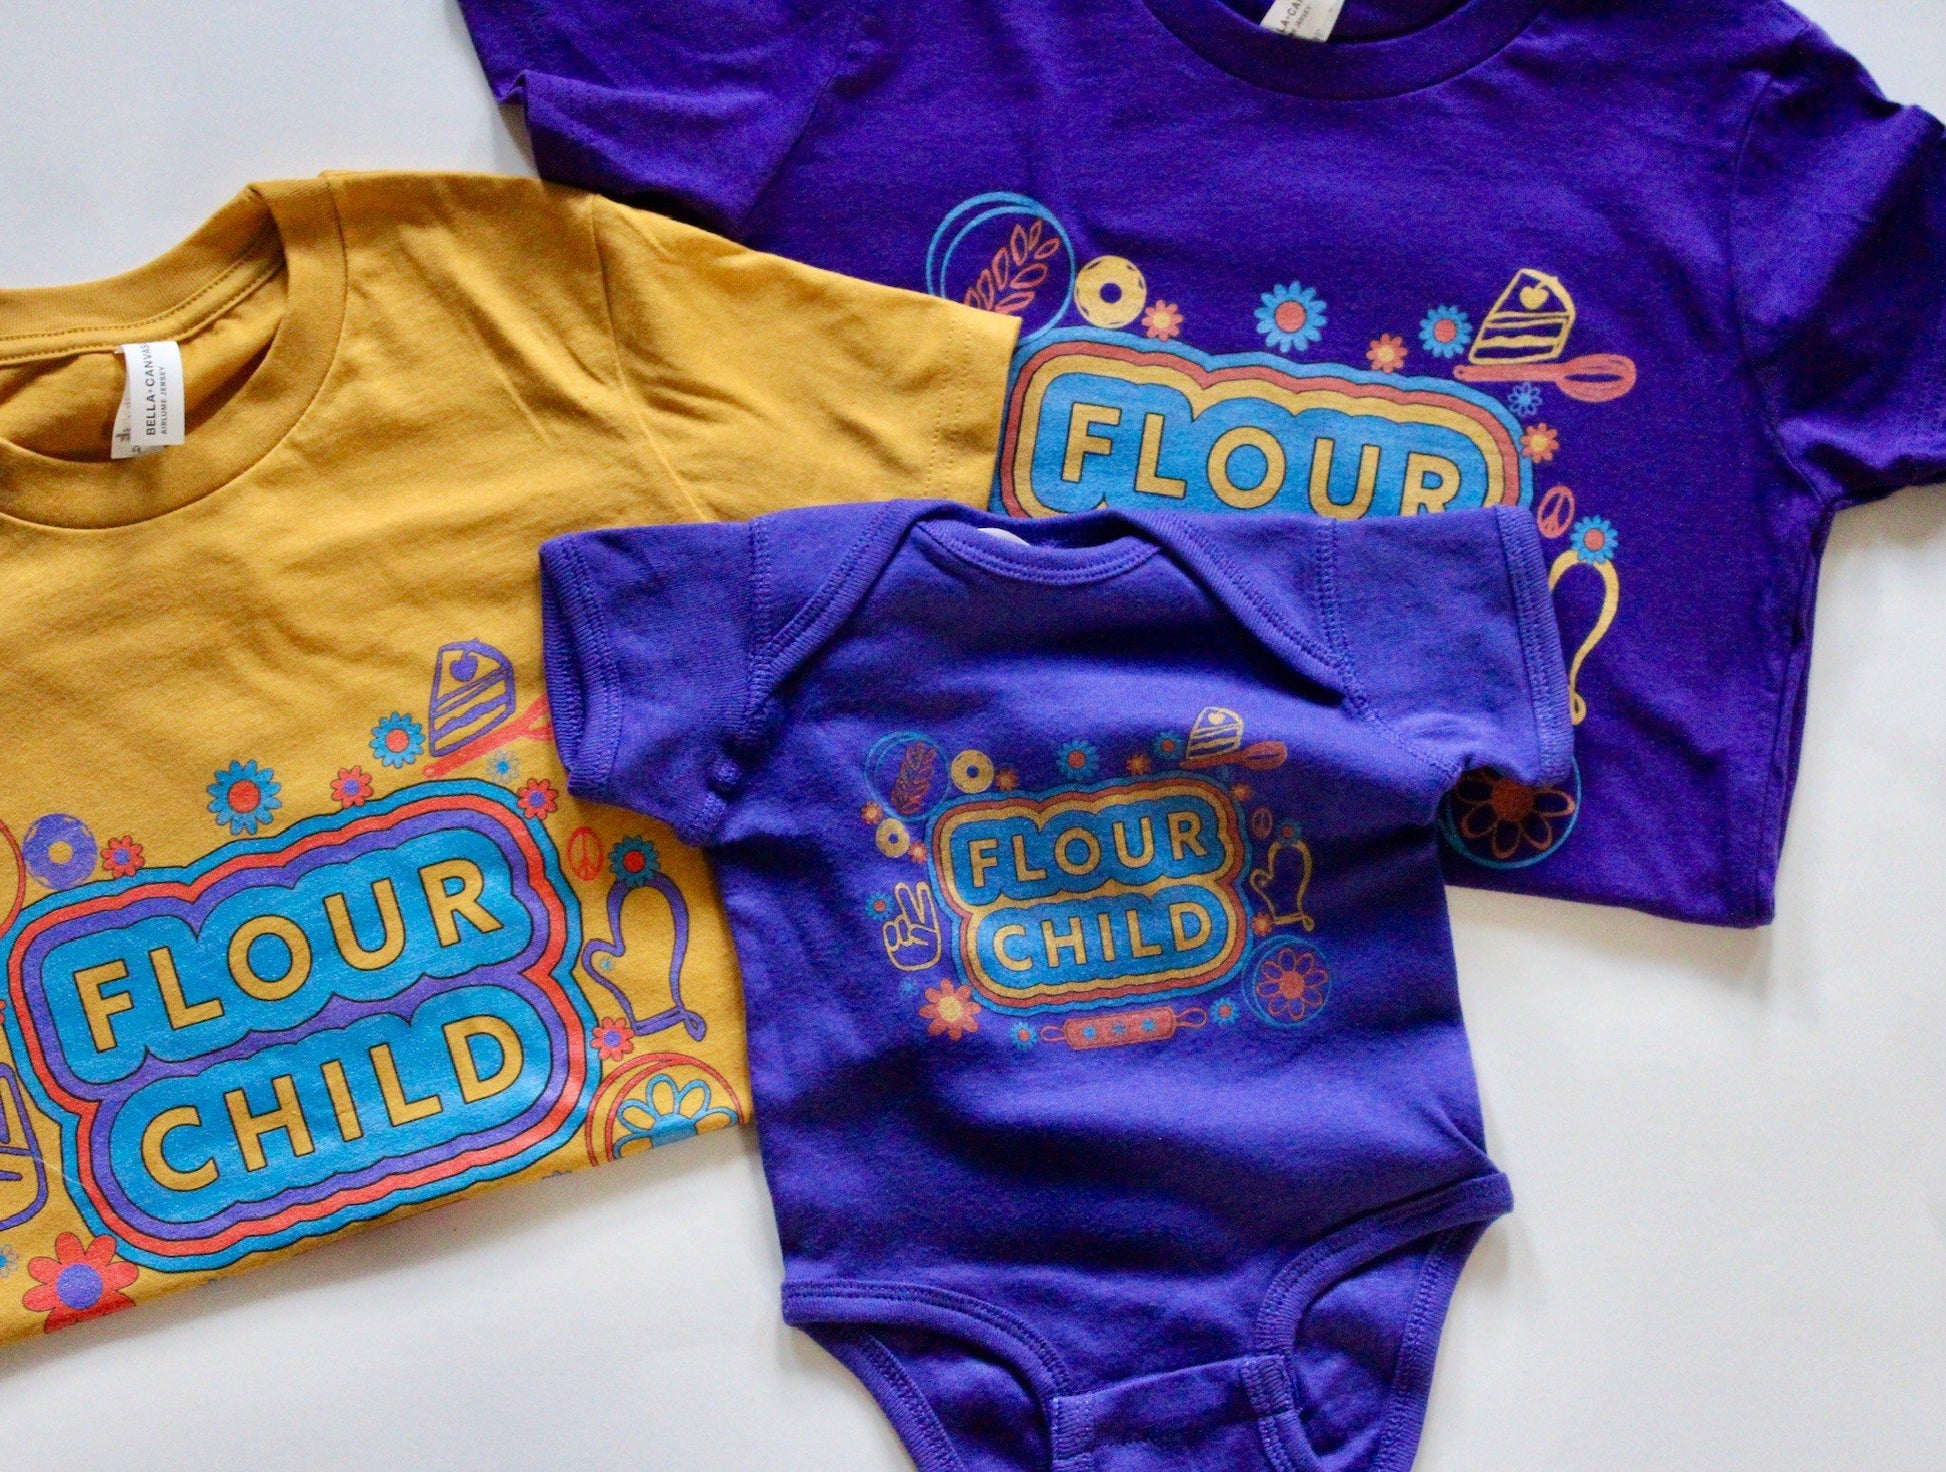 A yellow youth tee, a purple youth tee and a purple baby onesie with the words Flour Child and colorful designs